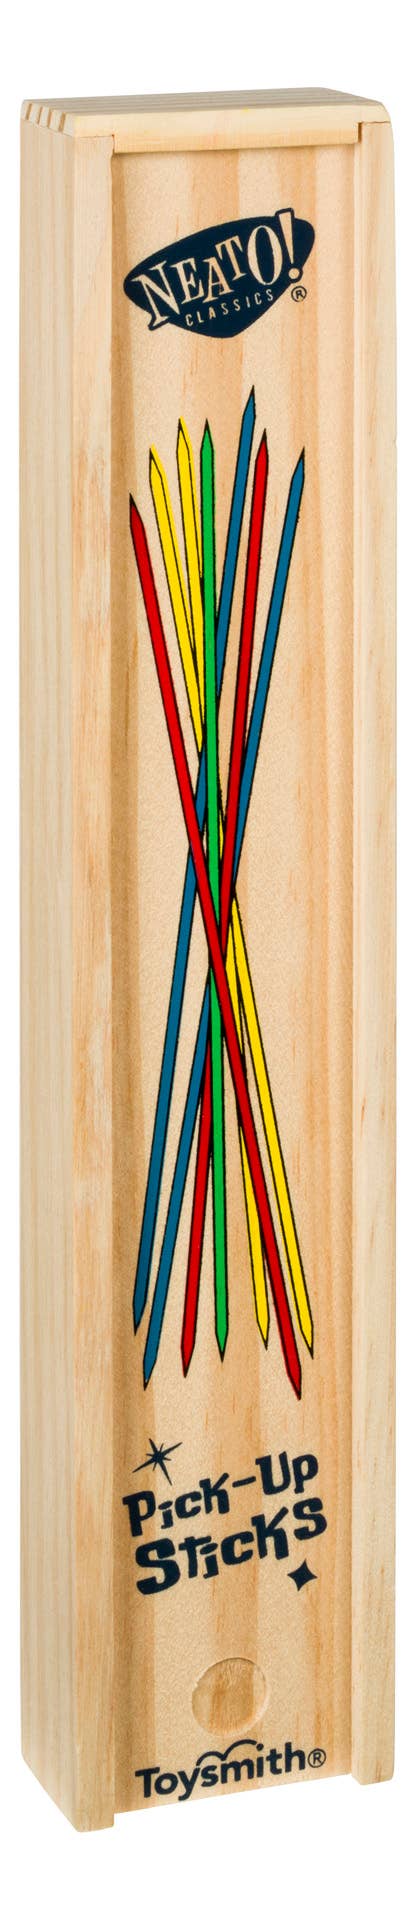 Neato! 41-Piece Pick-Up Sticks Game--Lemons and Limes Boutique